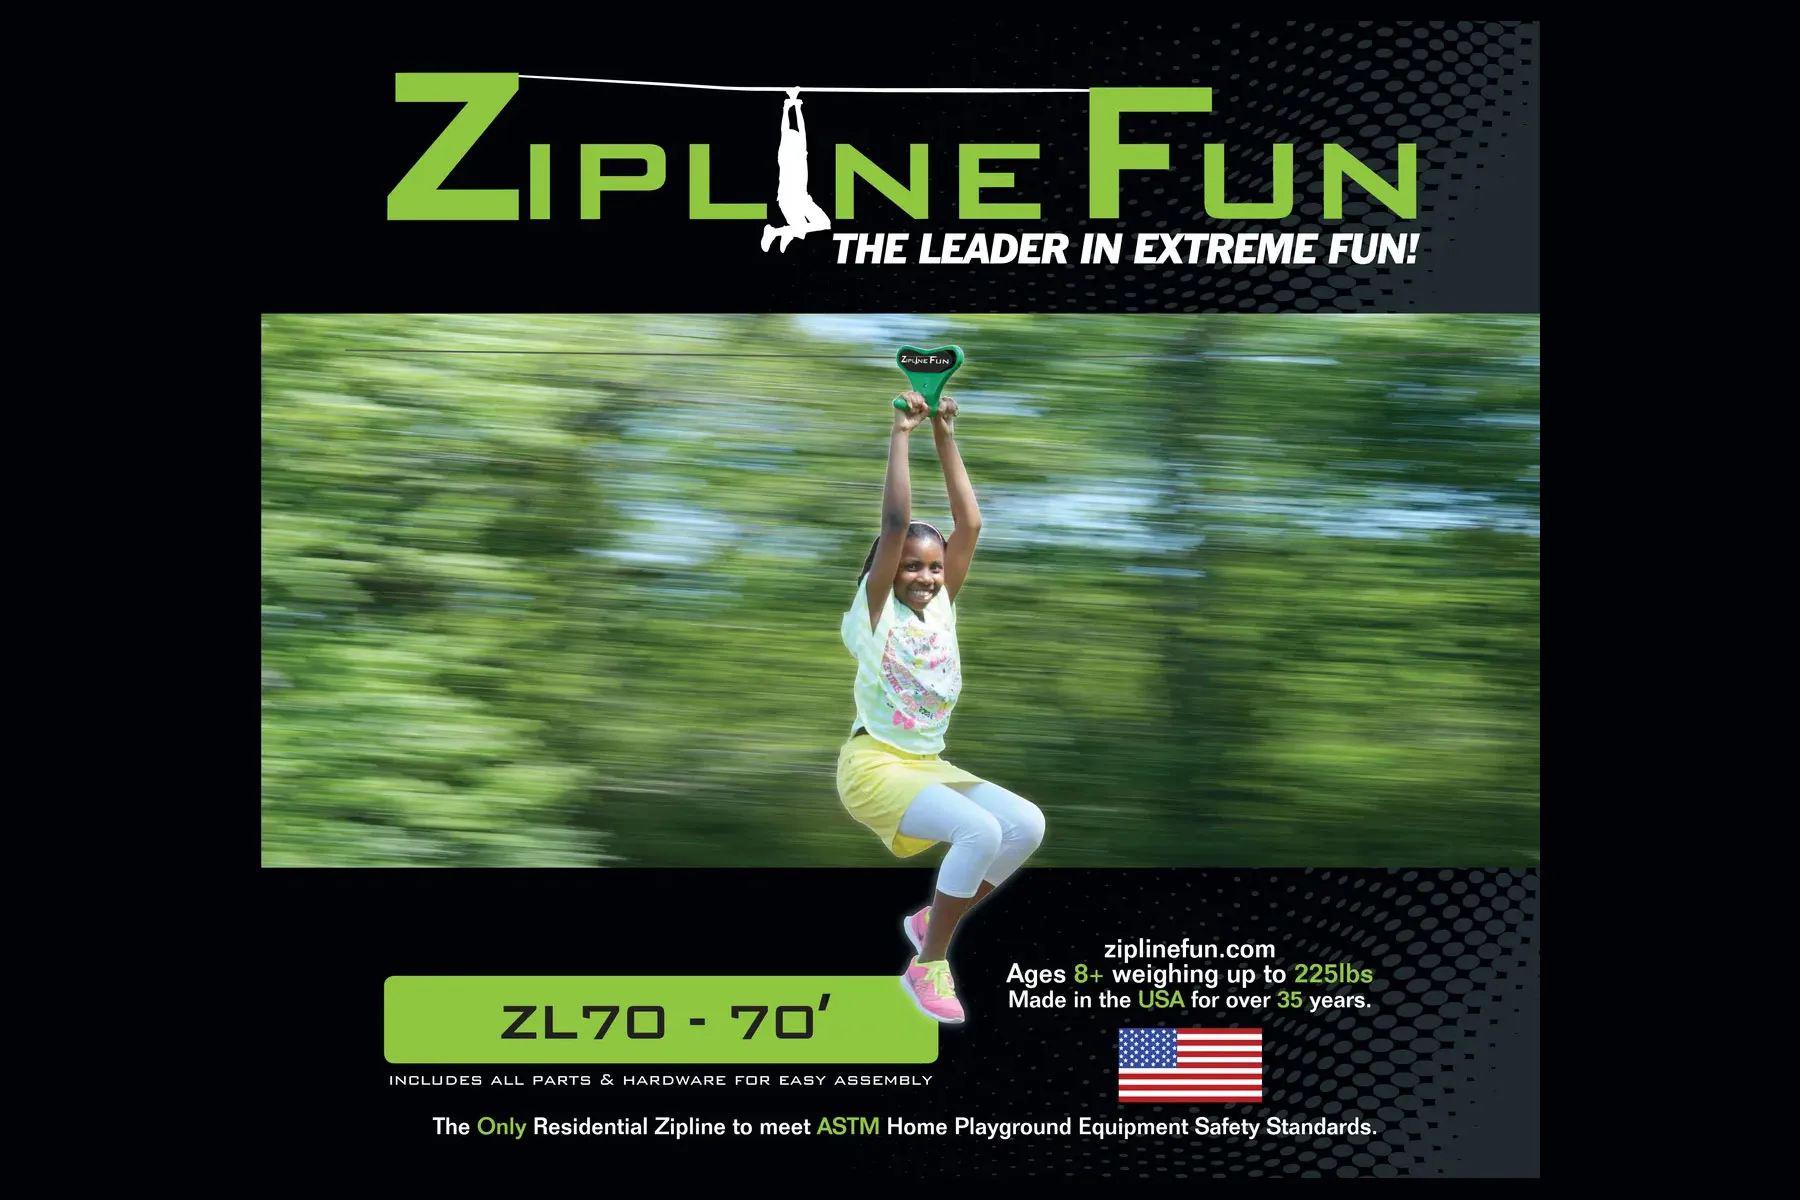 The best Zipline Fun of all! The ZL70 – 70′ Zip Line is built with safety, durability and fun in mind, perfect for daredevils young and old. 
Call (615) 595-5582 to start building backyard memories that last a lifetime